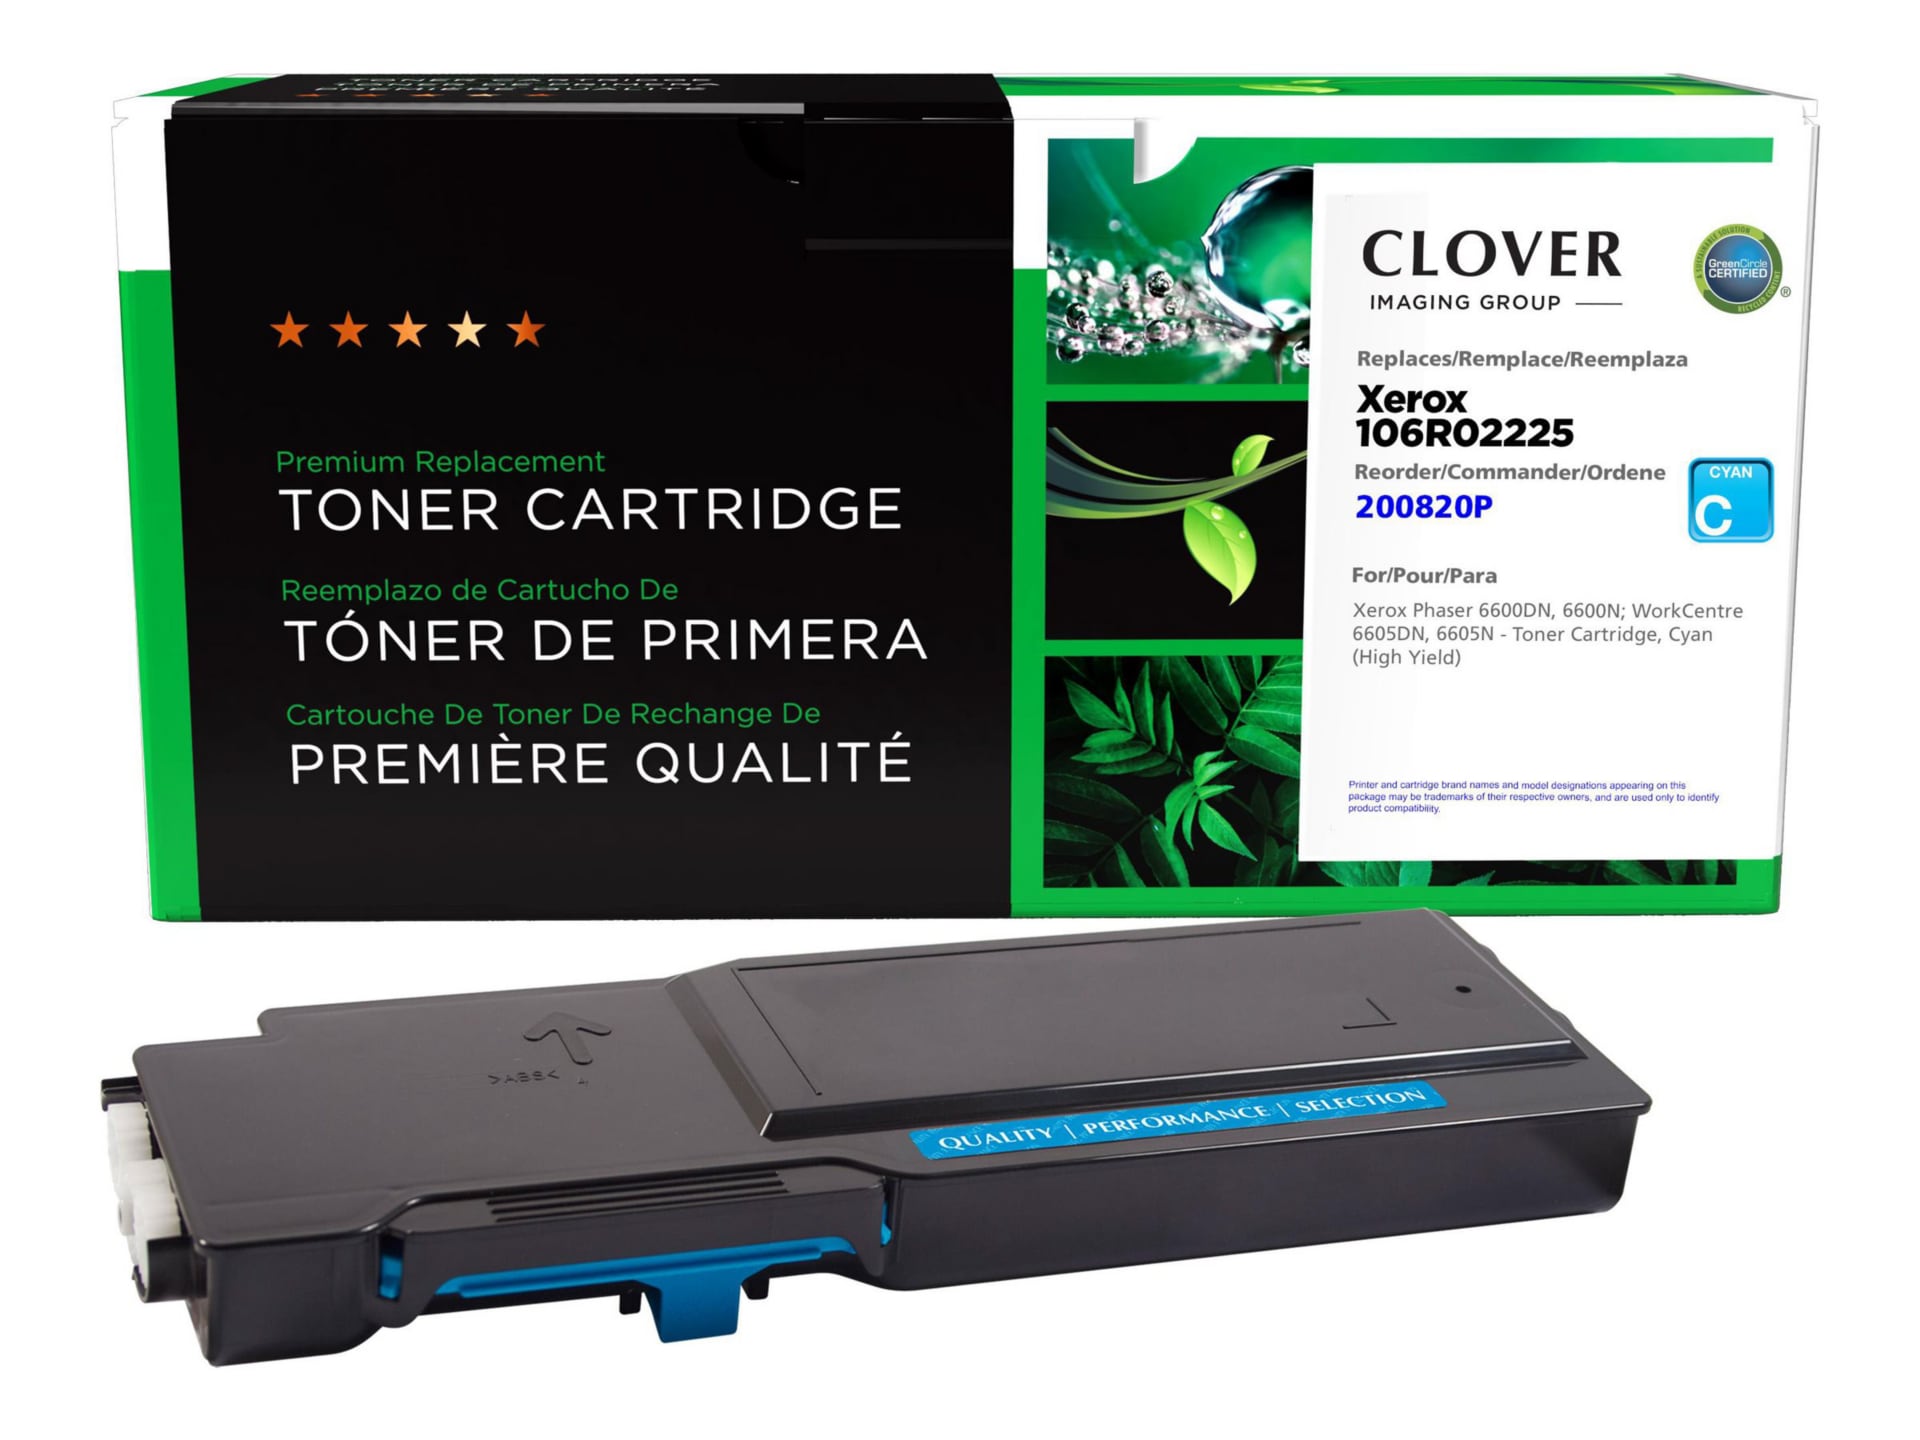 Clover Reman. Toner for Xerox Phaser 6600/6605 series, Cyan, 6,000 pg. yld.